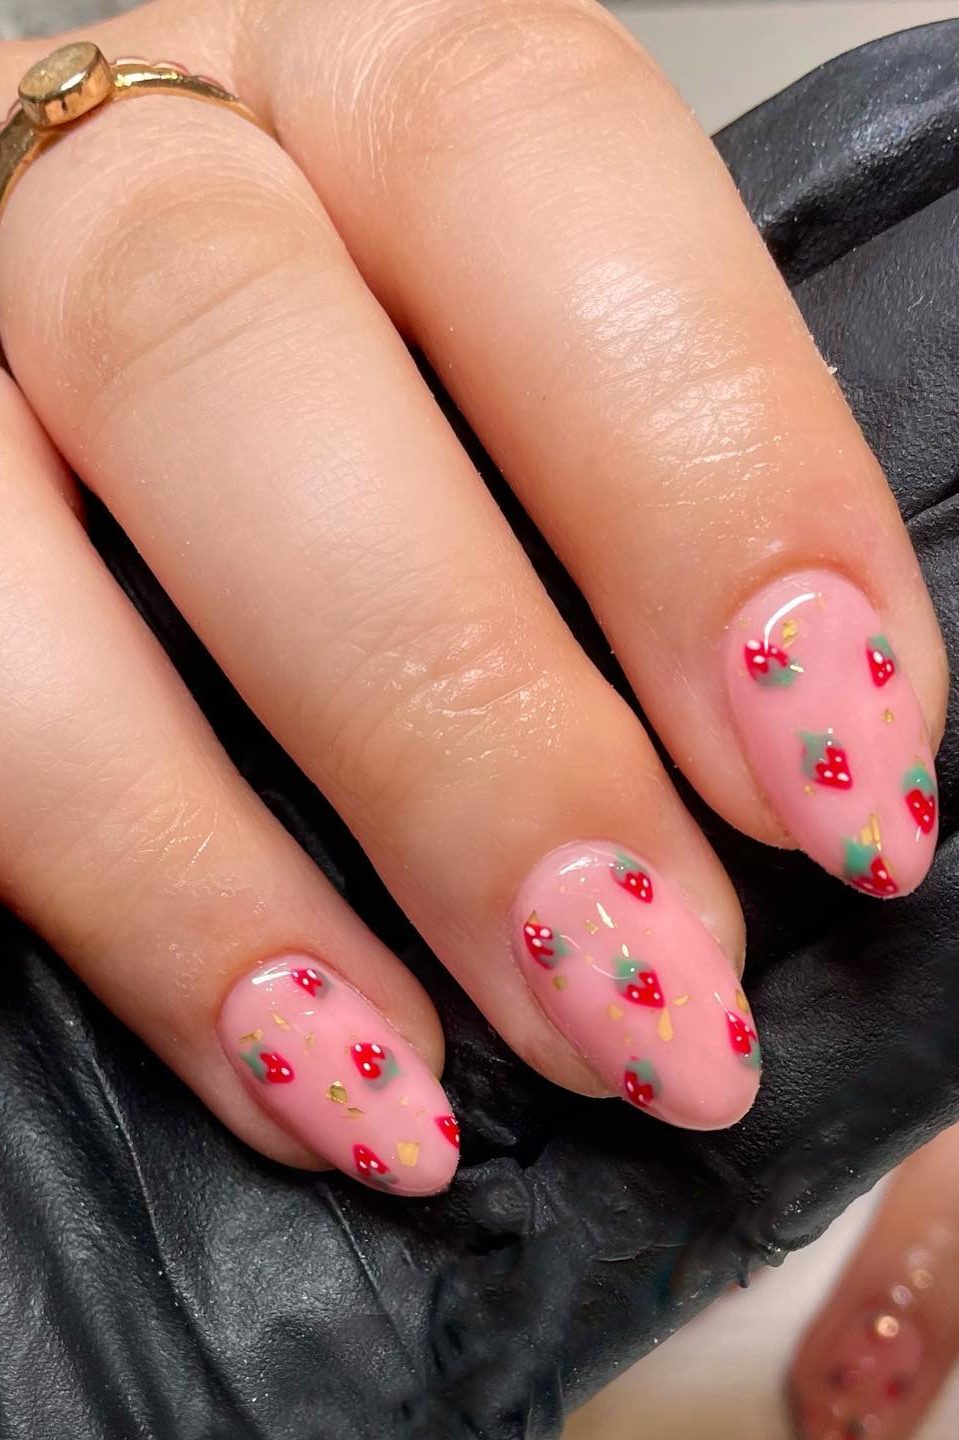 Strawberry nails, nude nails with strawberries